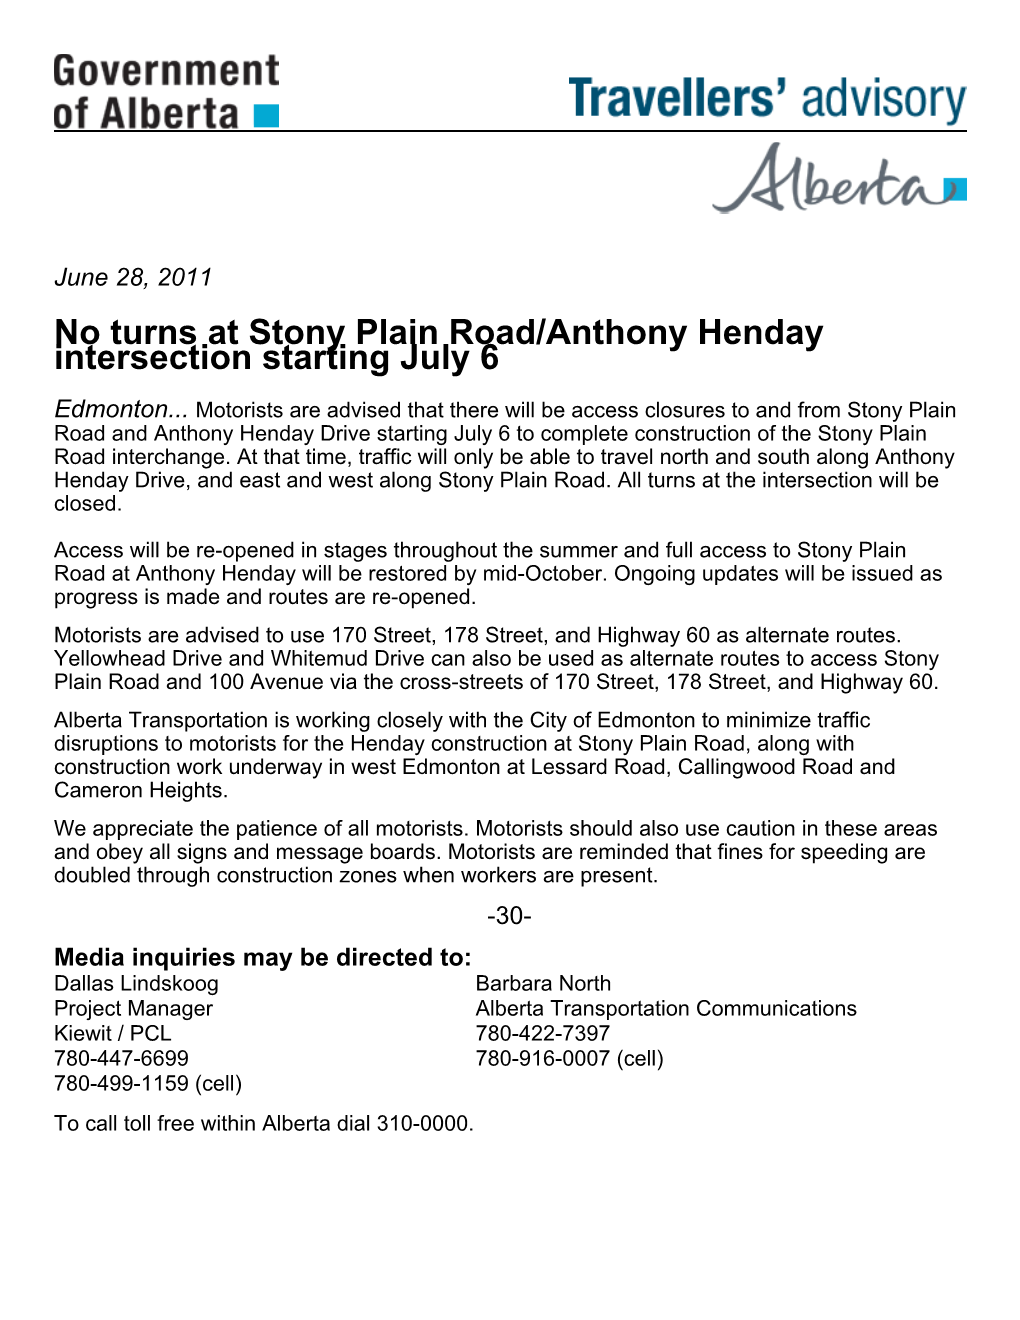 No Turns at Stony Plain Road/Anthony Henday Intersection Starting July 6